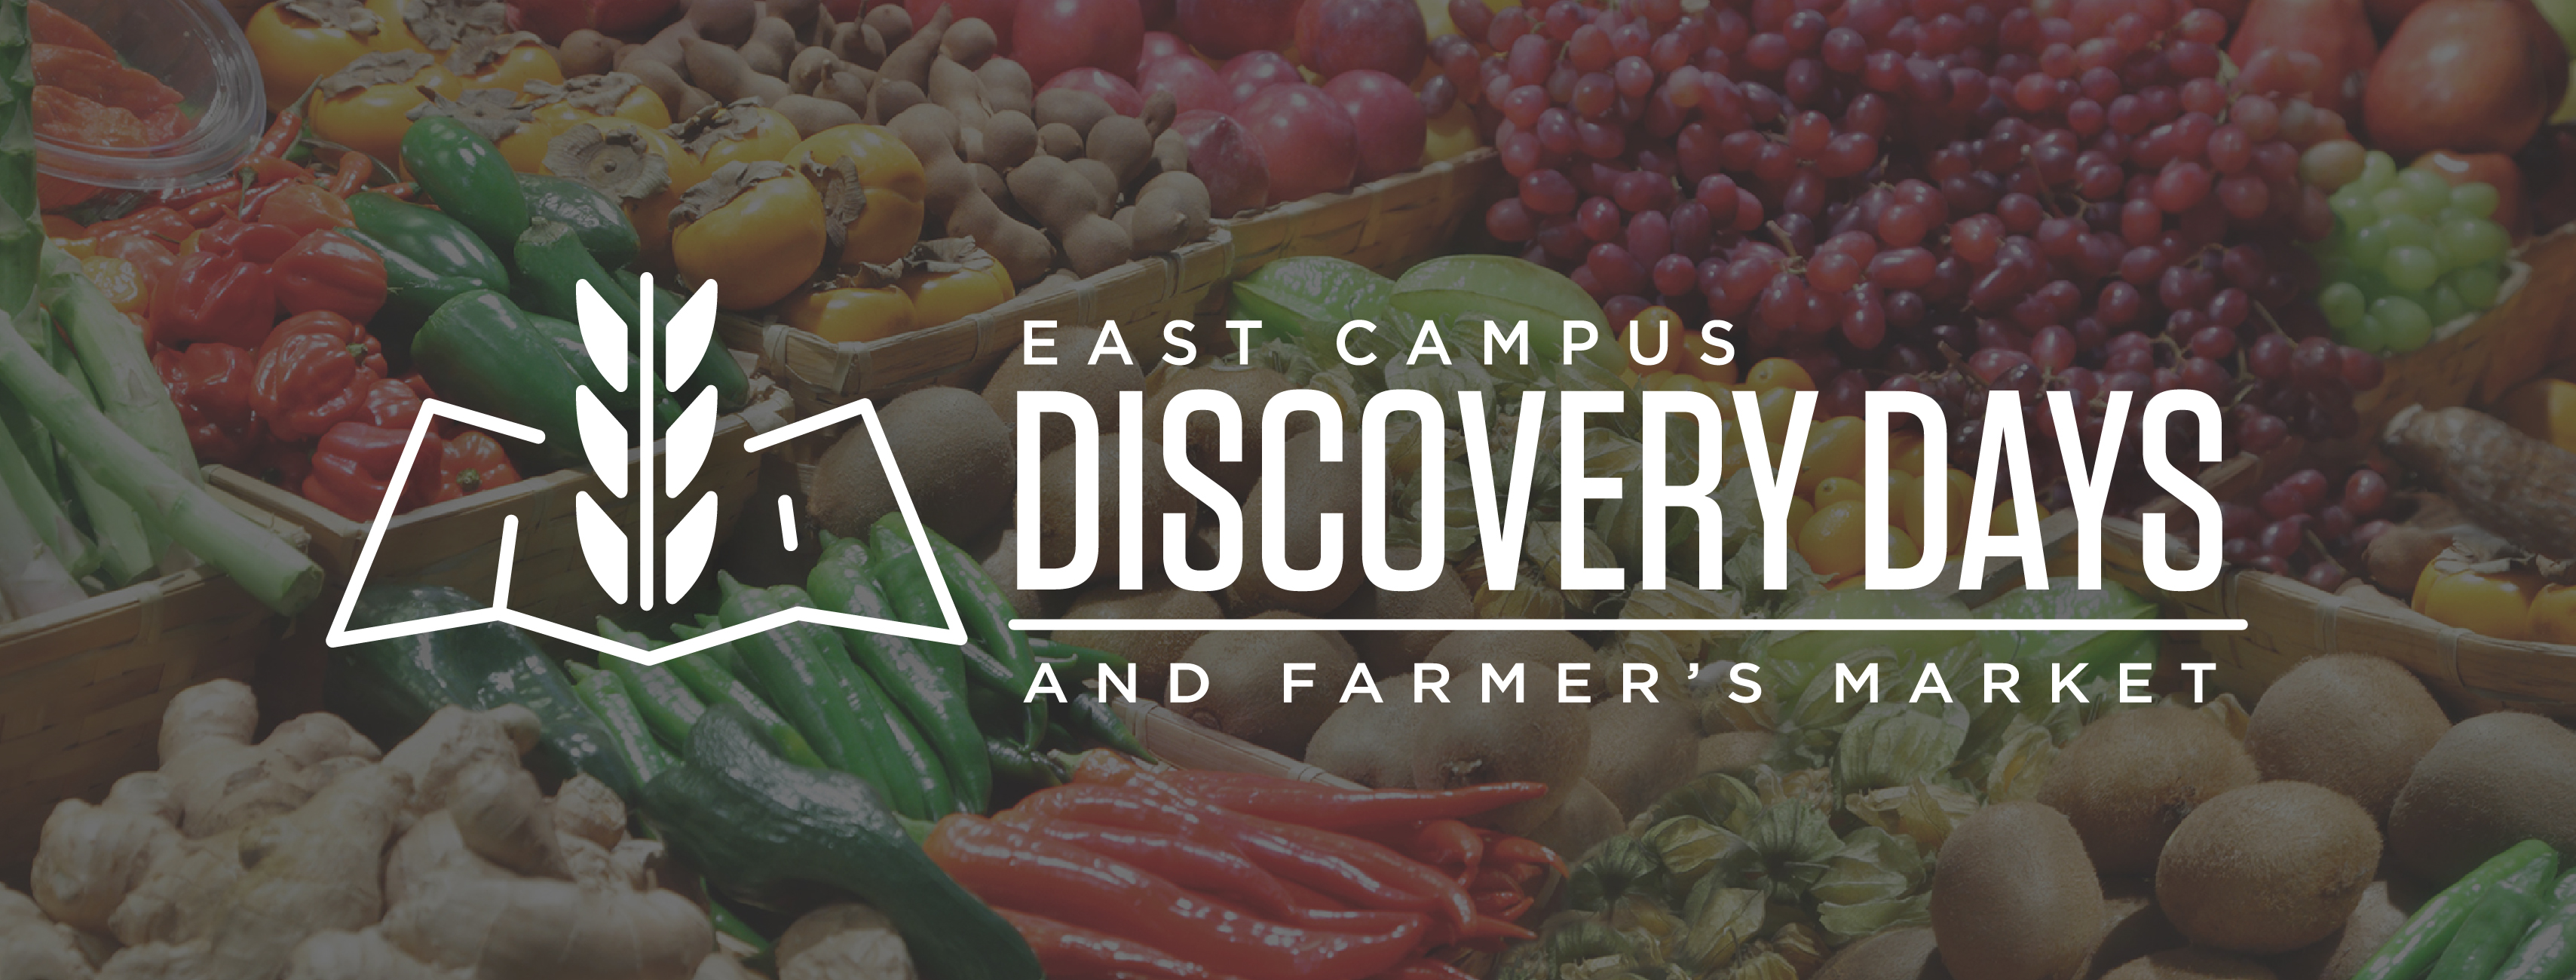 Enjoy free activities, buy local during East Campus Discovery Days and Farmer's Market